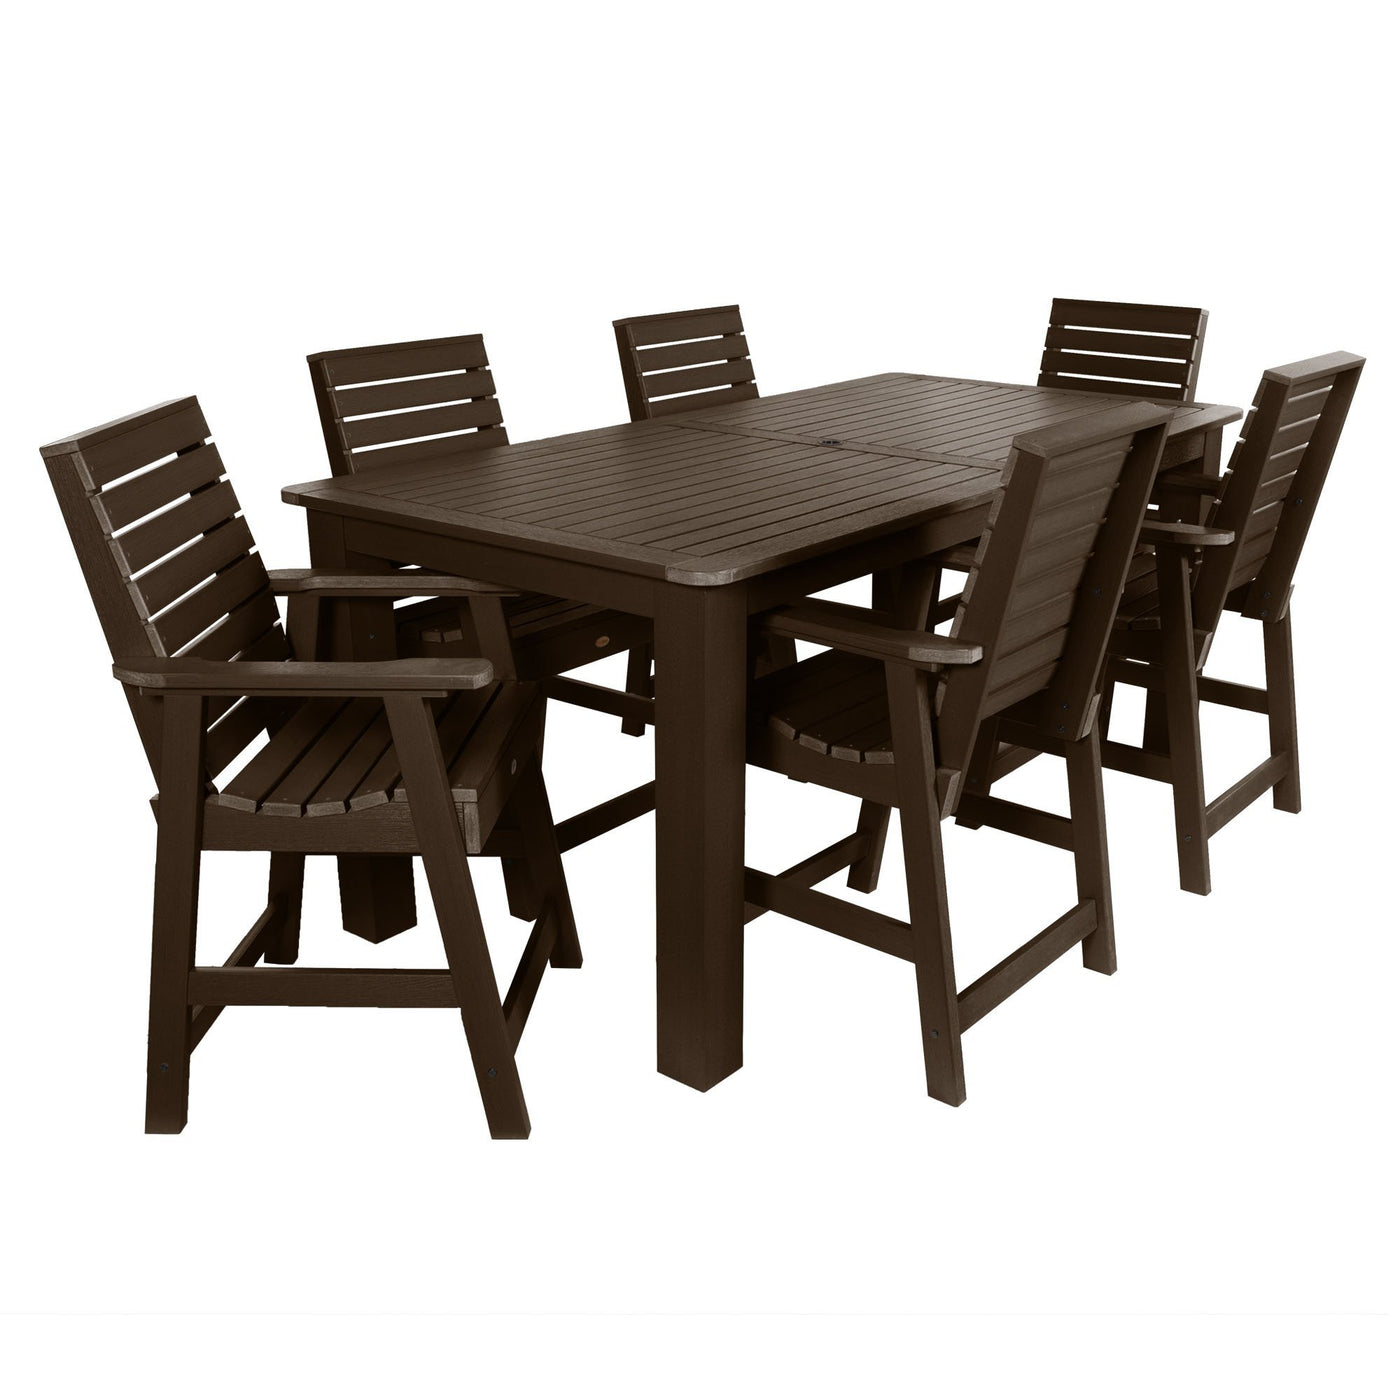 Weatherly 7pc Rectangular Outdoor Dining Set 42in x 84in - Counter Height Dining Highwood USA Weathered Acorn 